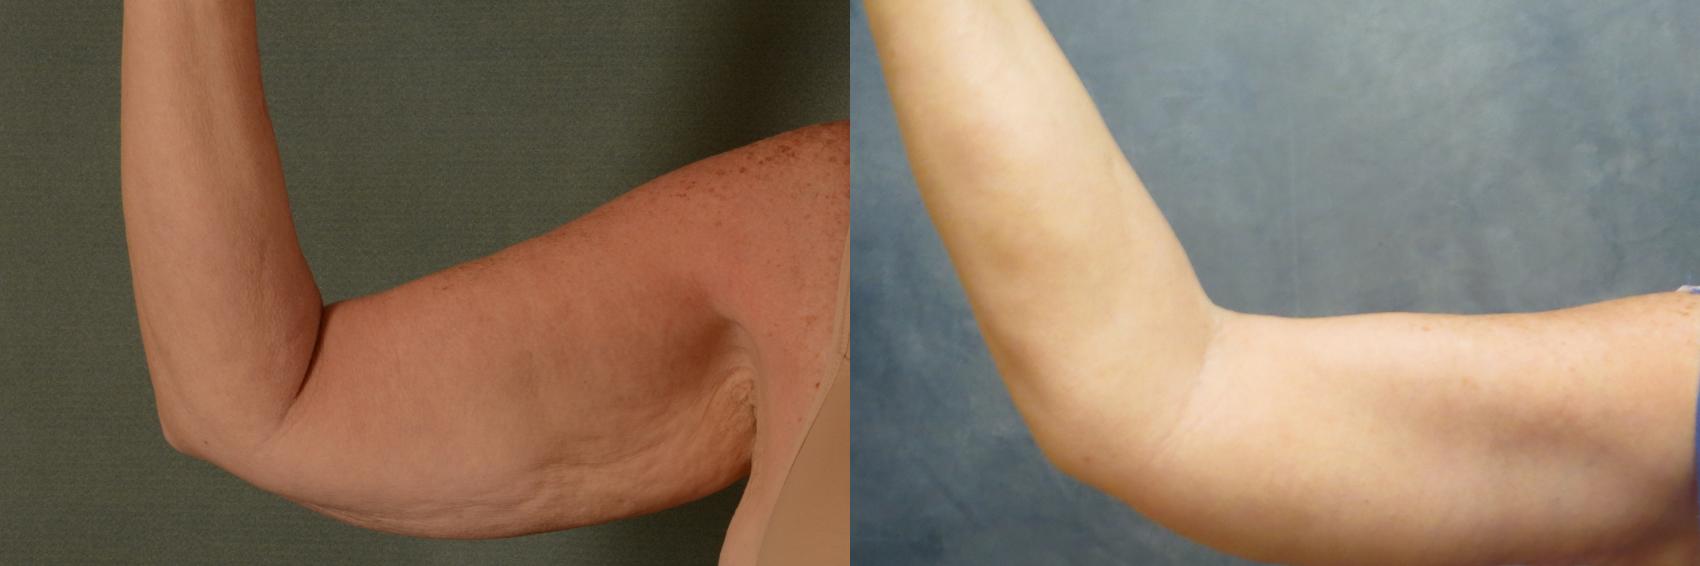 Before & After Arm Lift (Brachioplasty) Case 460 Front View in Tallahassee, FL